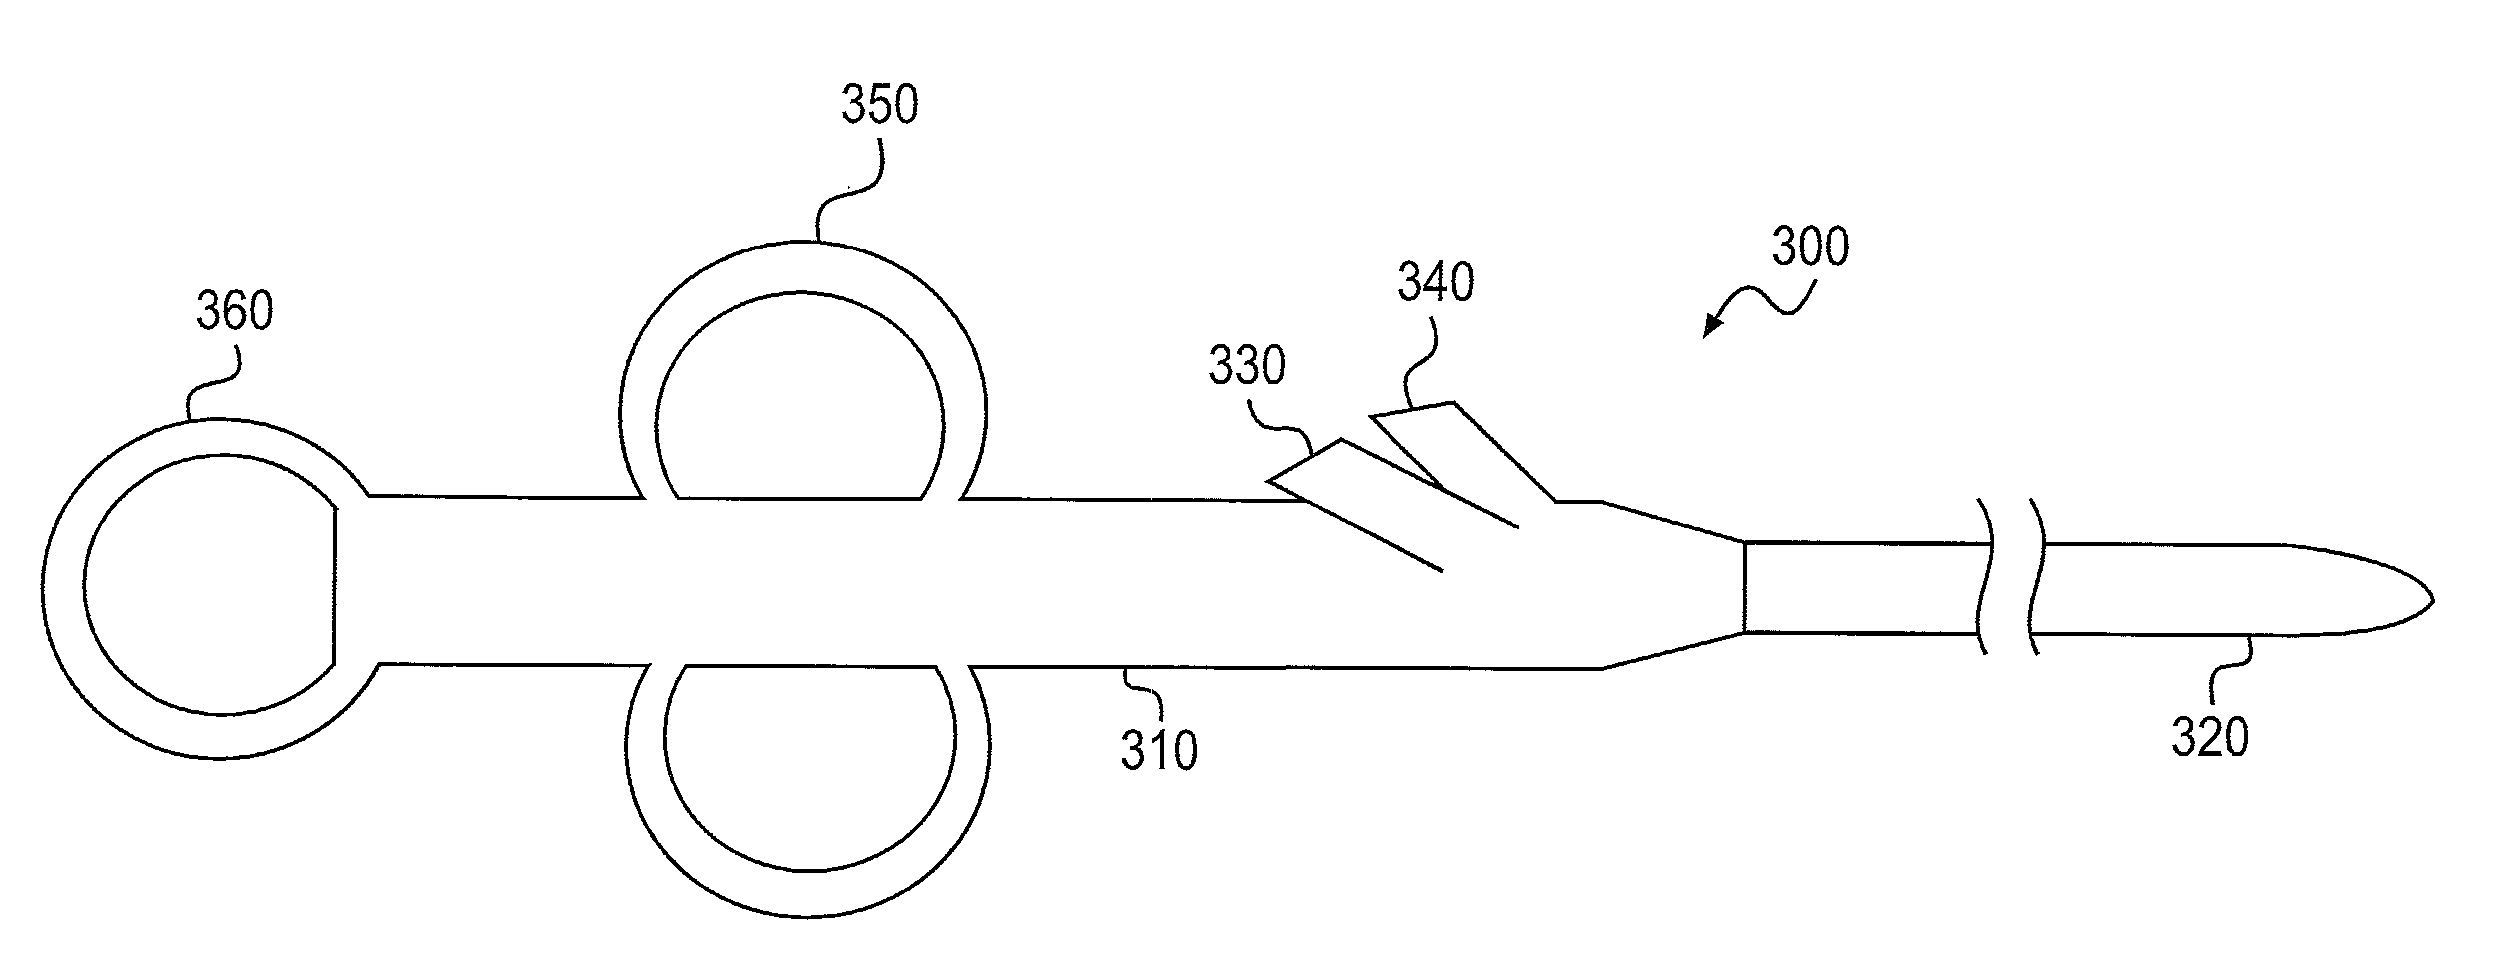 Dual lumen pancreaticobiliary catheter and methods of cannulating the pancreaticobiliary system